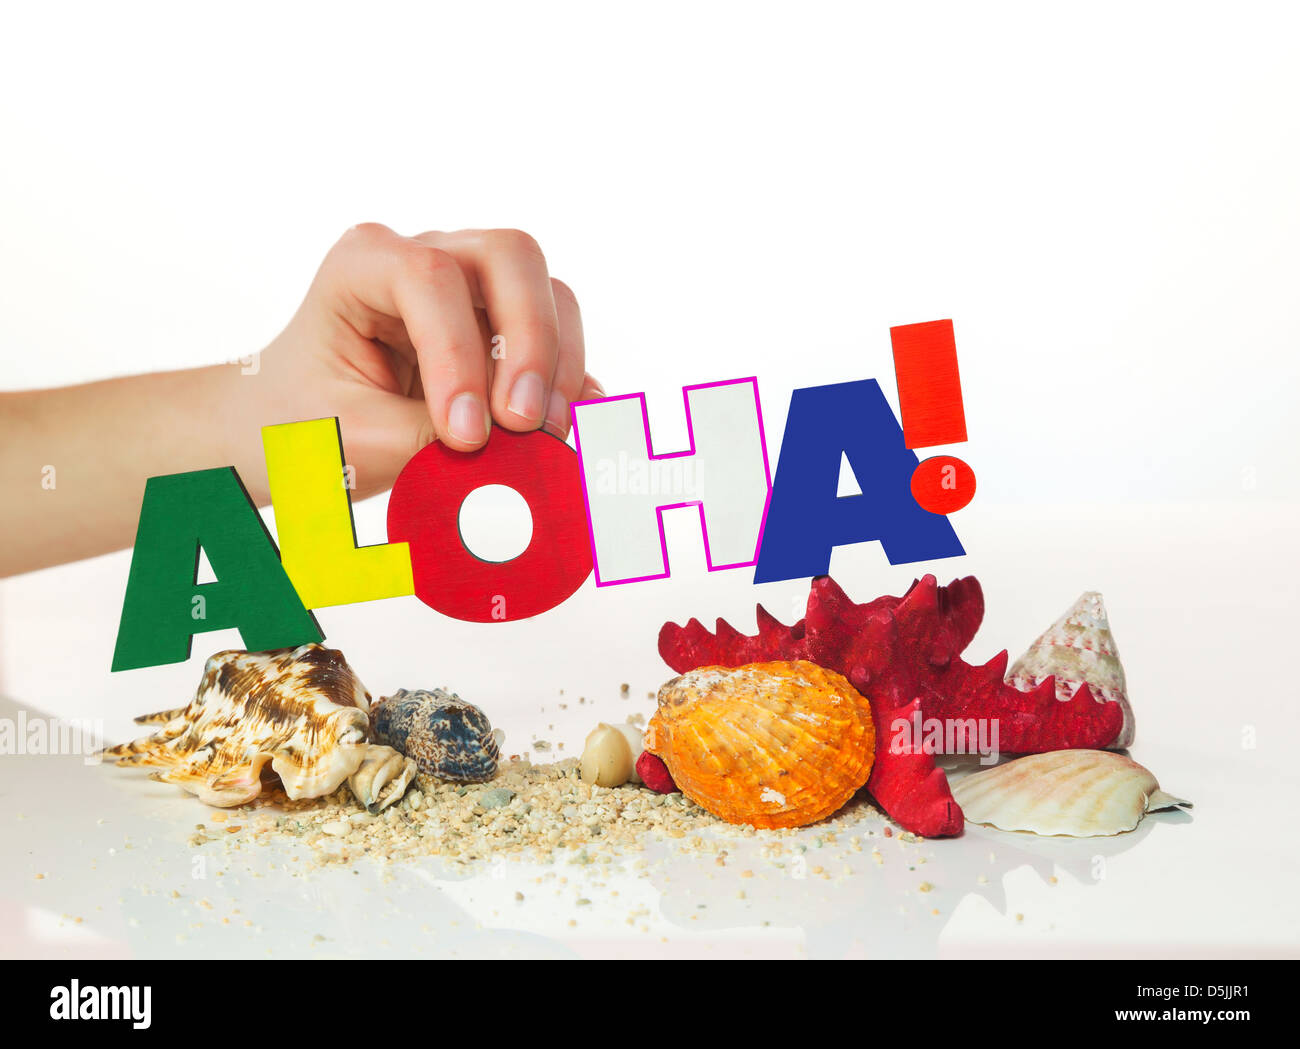 Femme's hand holding colorful mot 'Aloha' against white background Banque D'Images